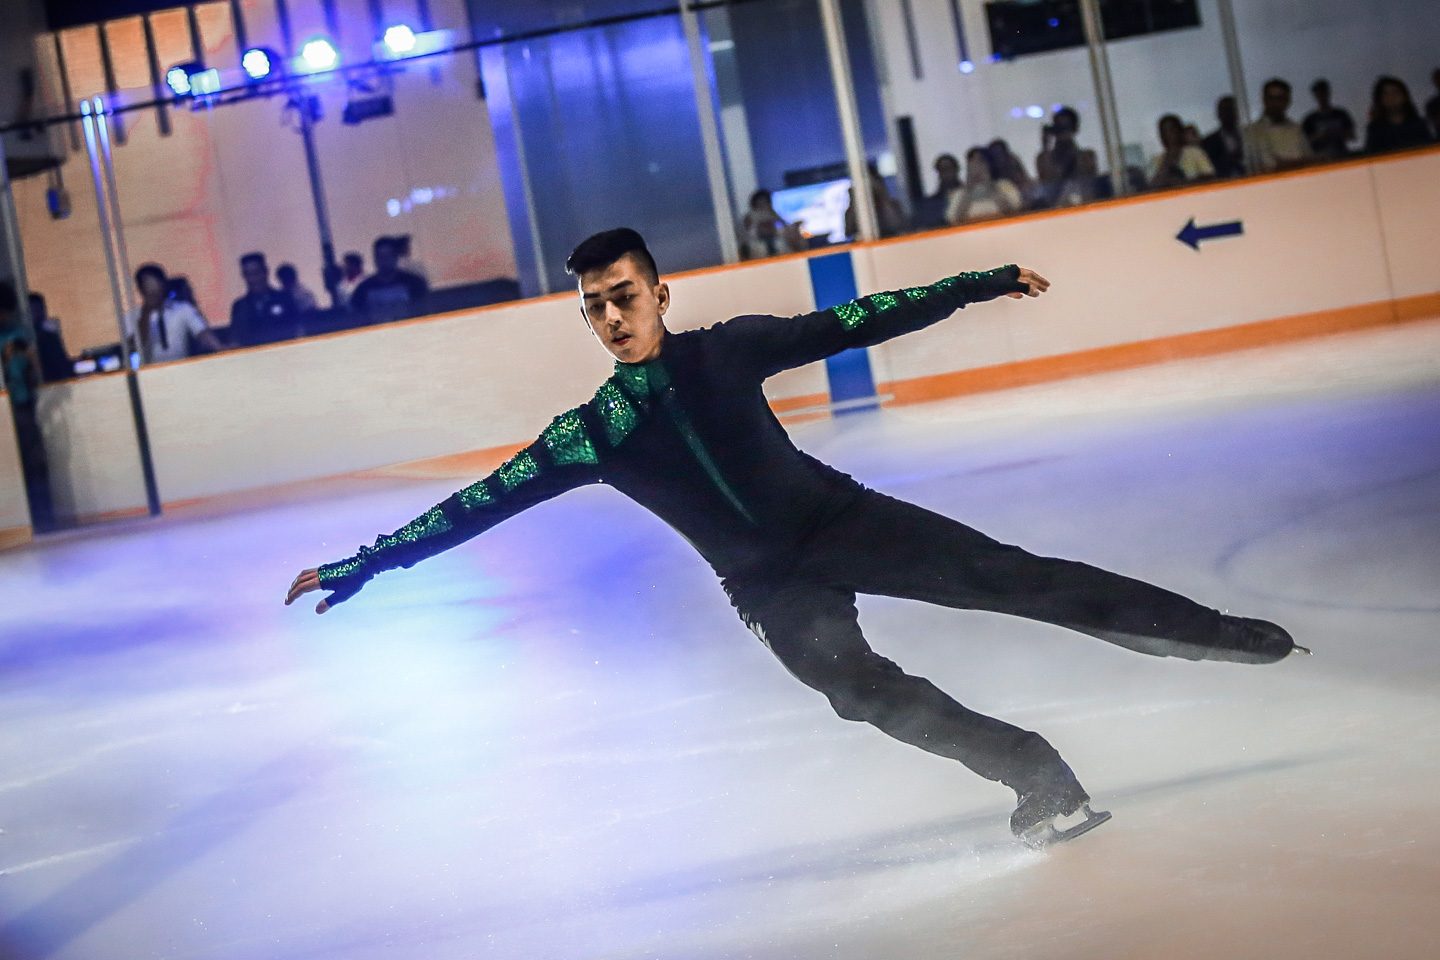 More skating for two-time Olympian Michael Christian Martinez